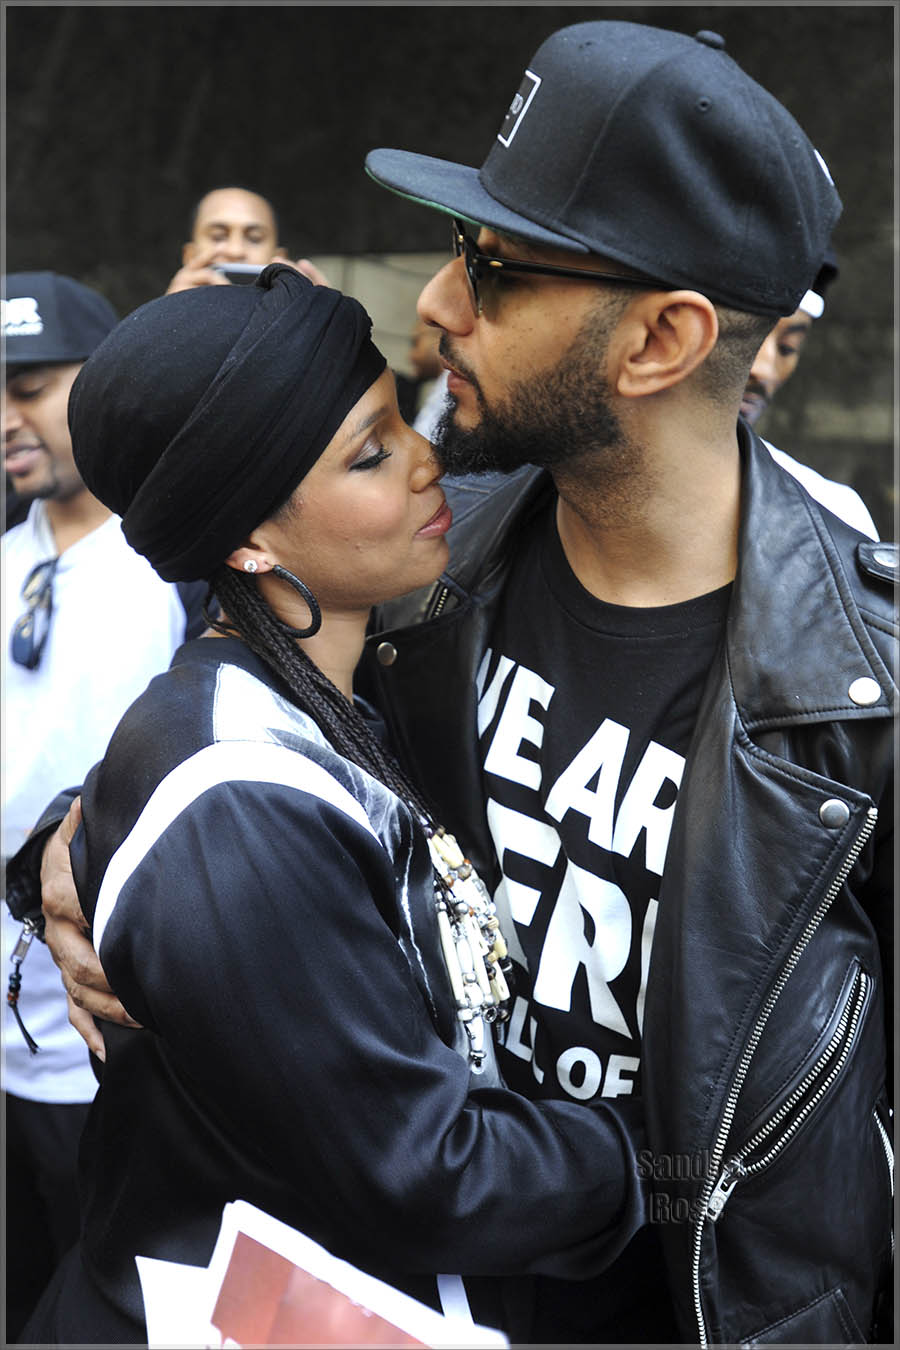 Alicia Keys and husband, producer-rapper Swizz Beatz hold a protest outside the Nigerian Consulate